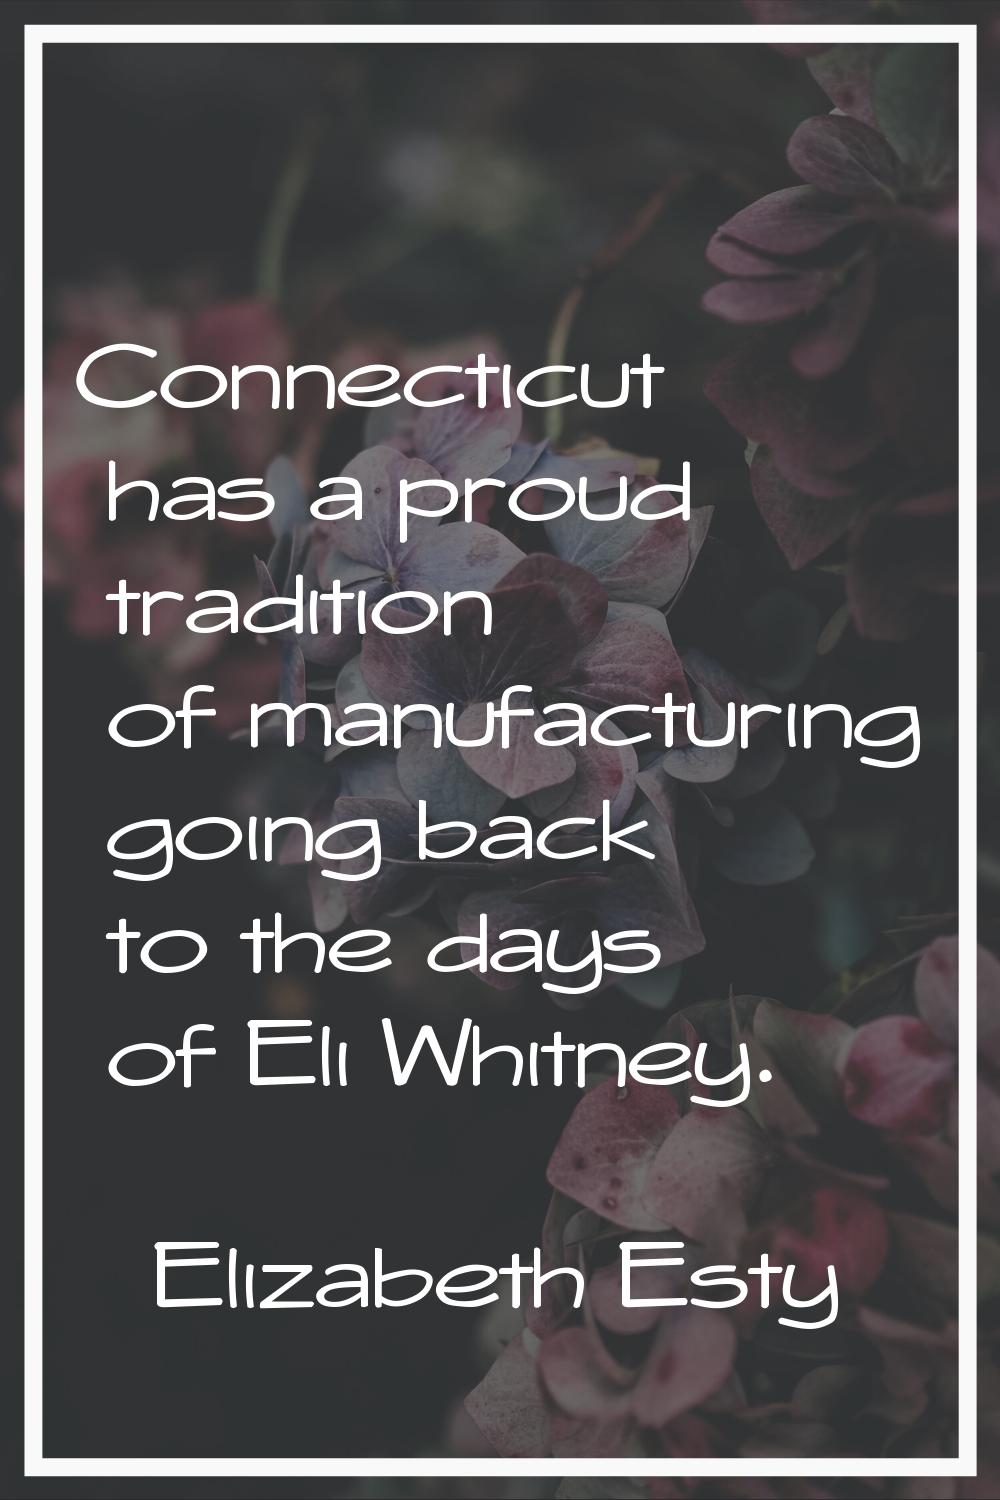 Connecticut has a proud tradition of manufacturing going back to the days of Eli Whitney.